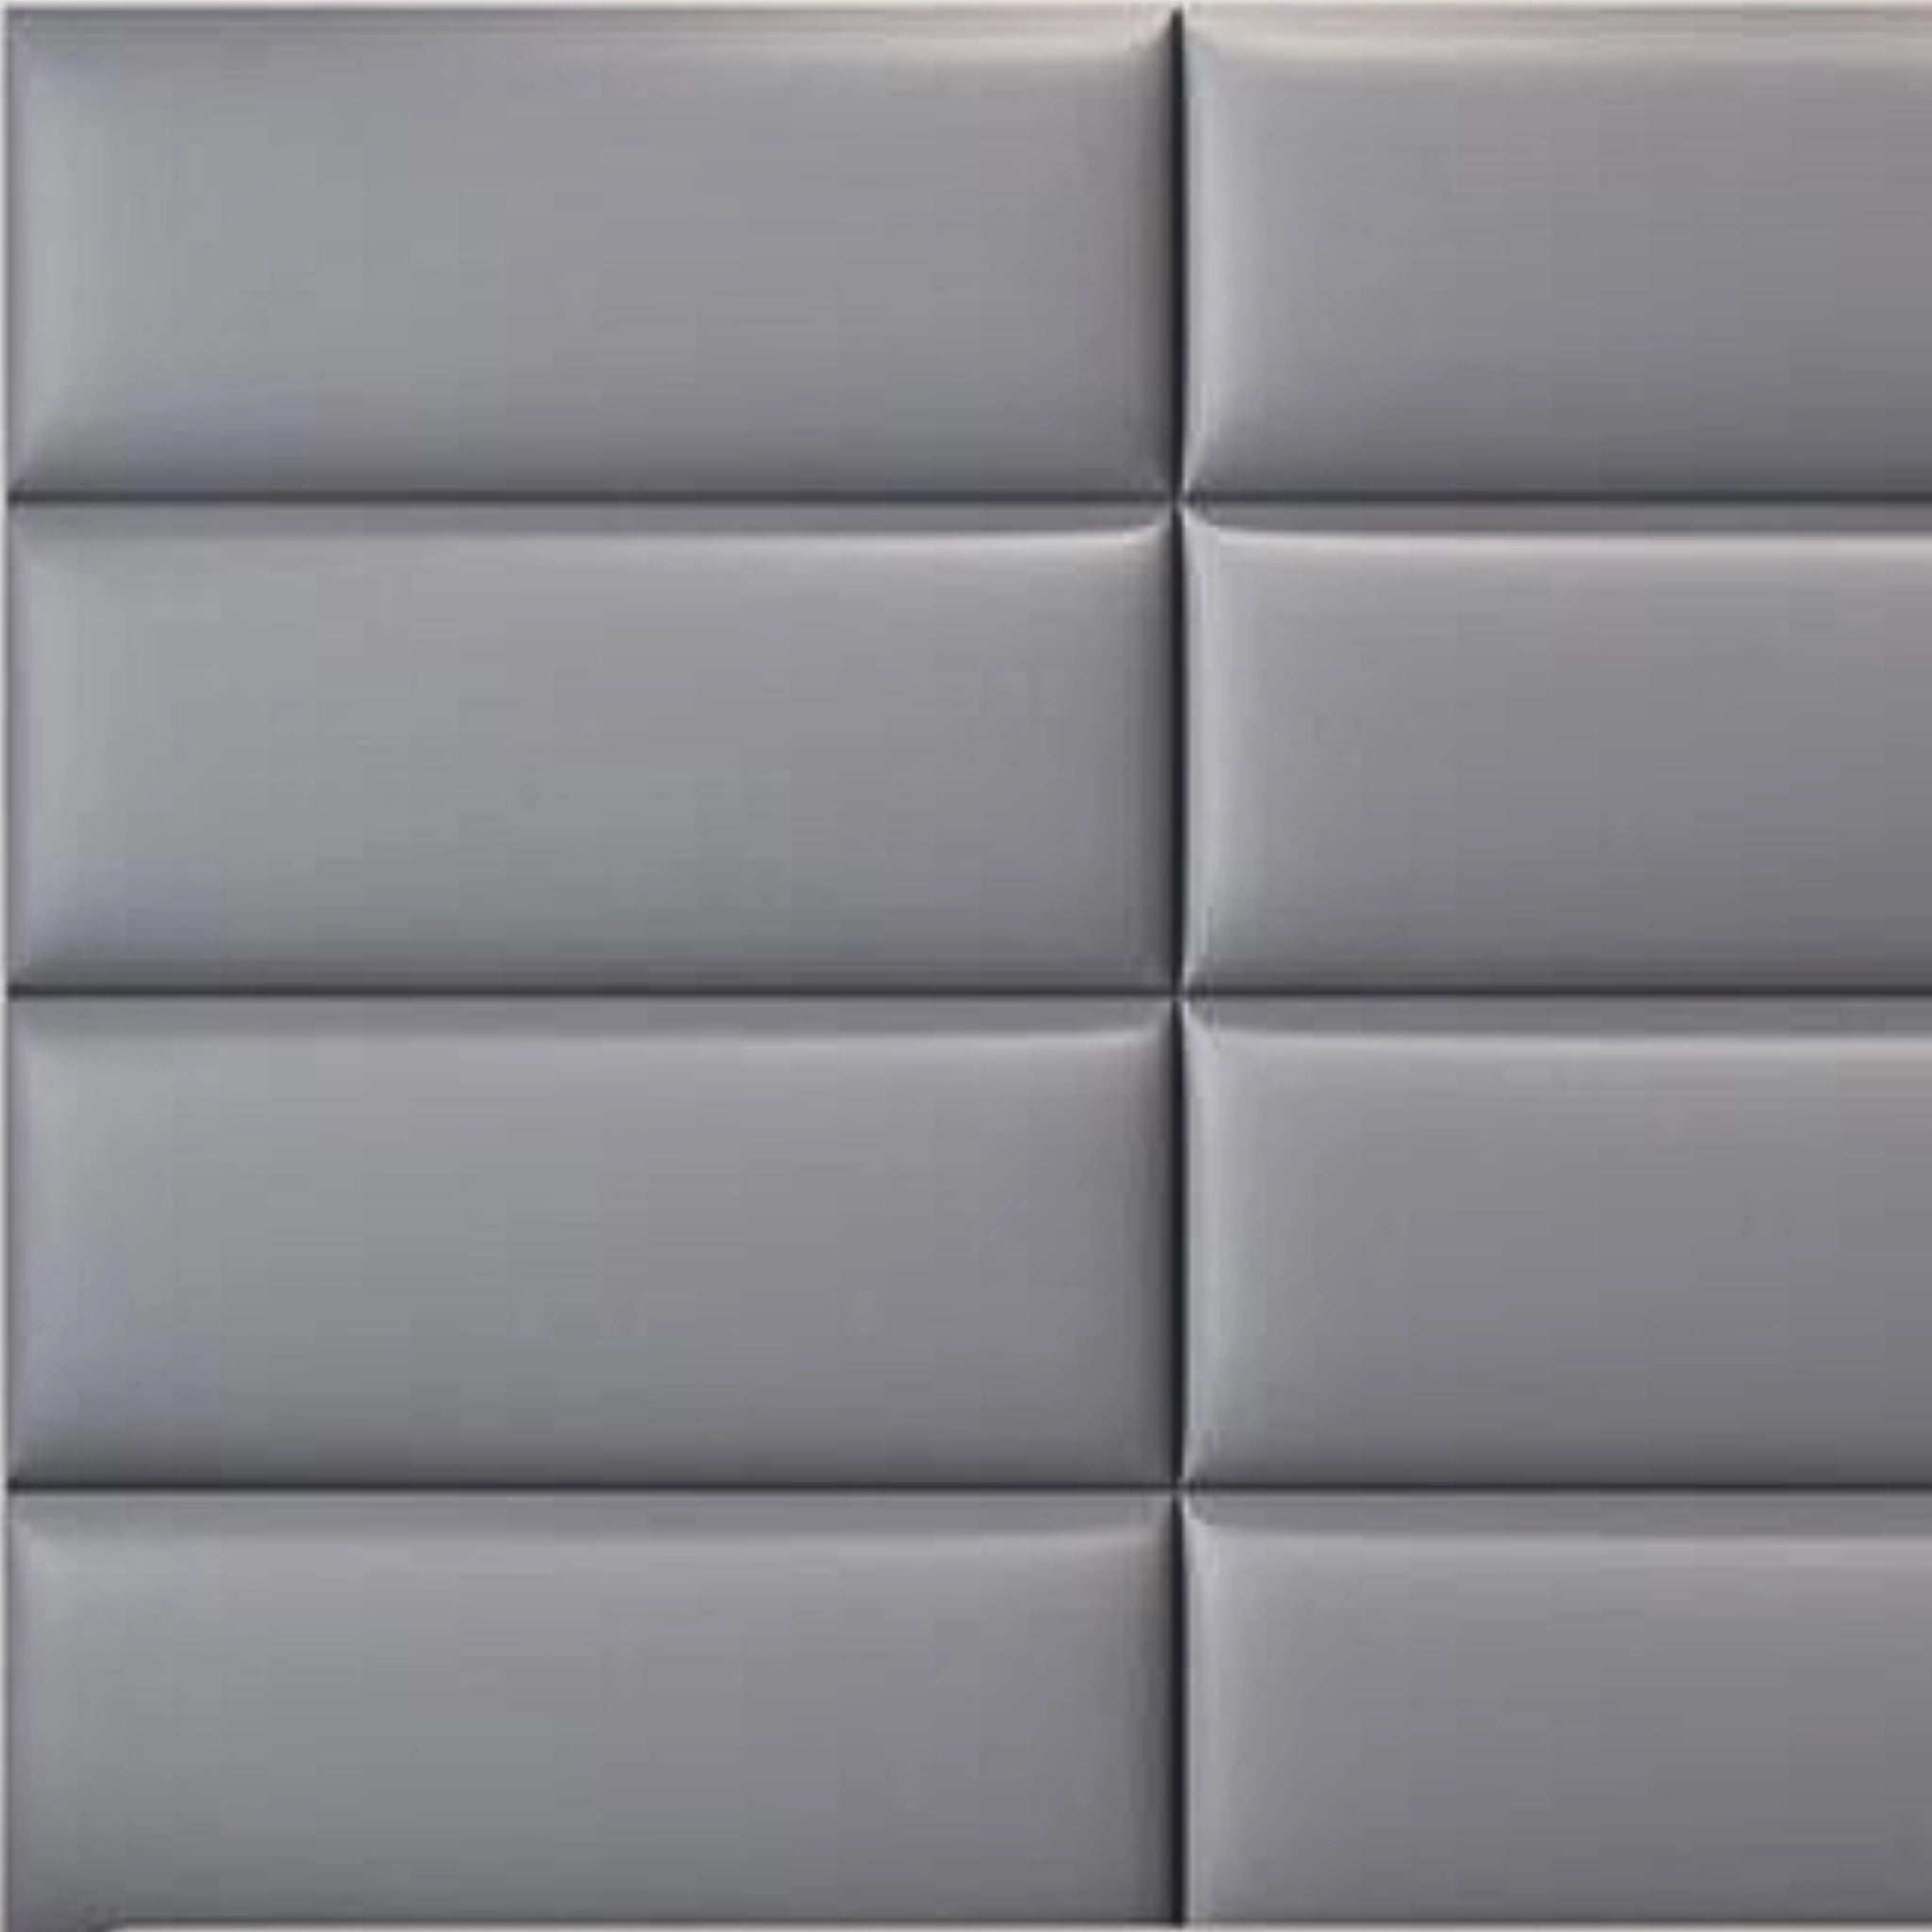 Grey upholstered wall panel with padded surface, close-up view